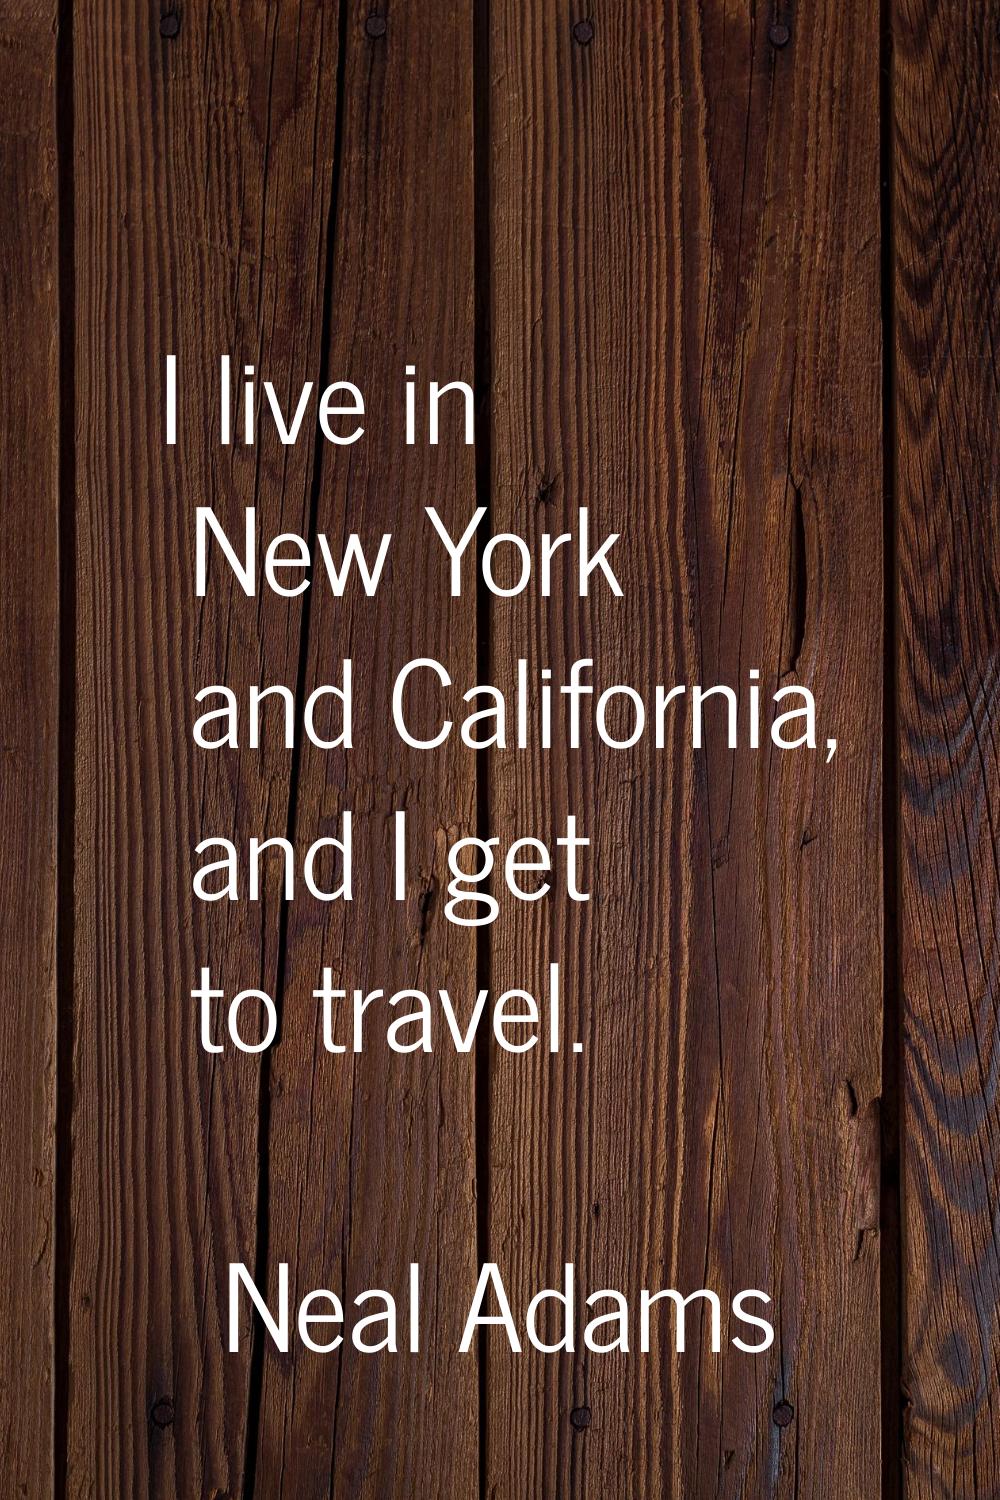 I live in New York and California, and I get to travel.